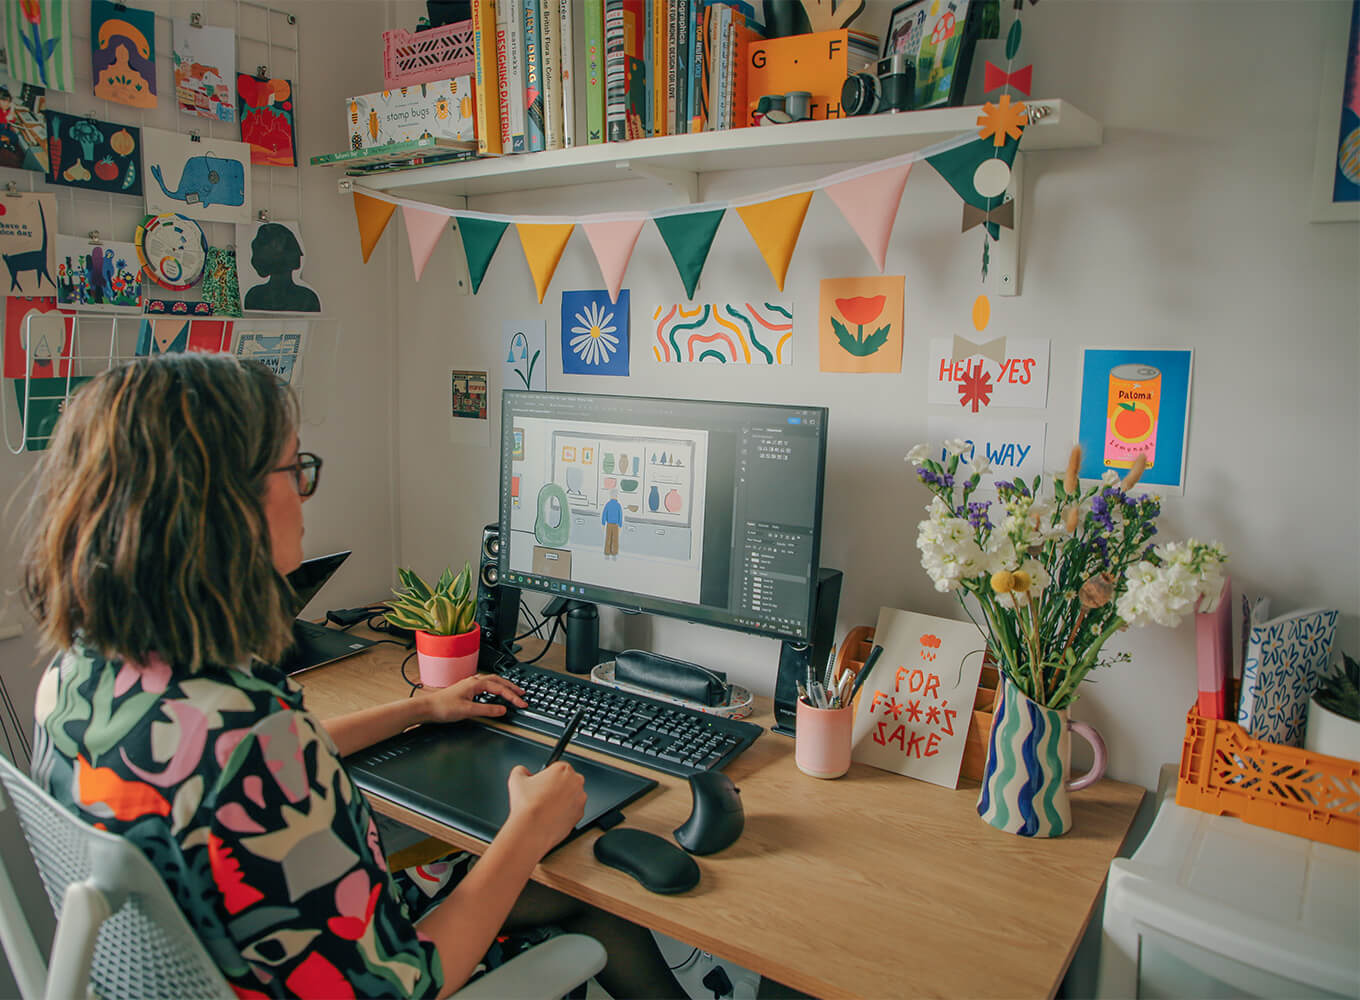 Illustrator and maker Taaryn Brench's designing inside her colourful studio